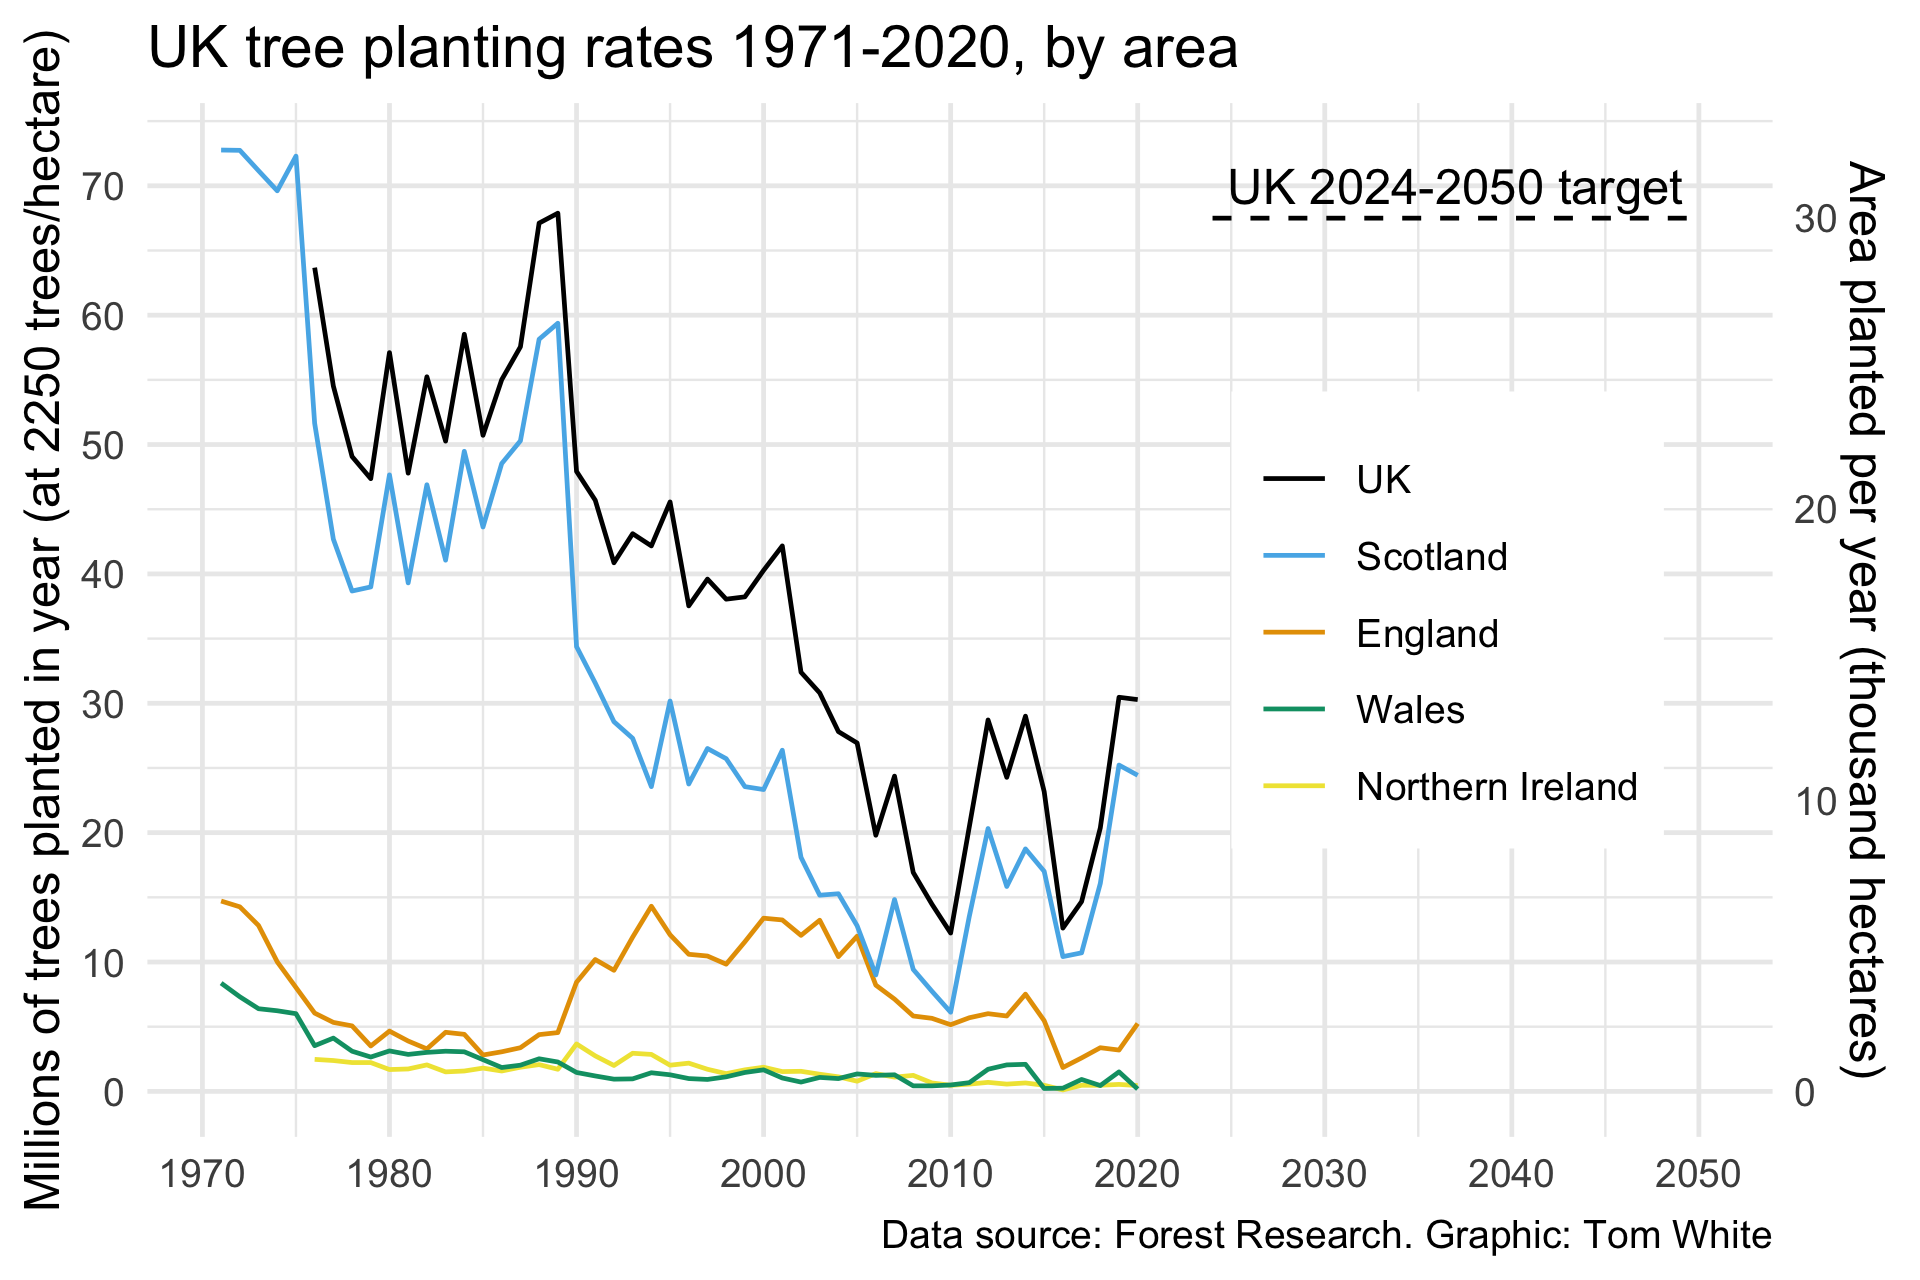 UK tree planting rates 1971-2020, by area